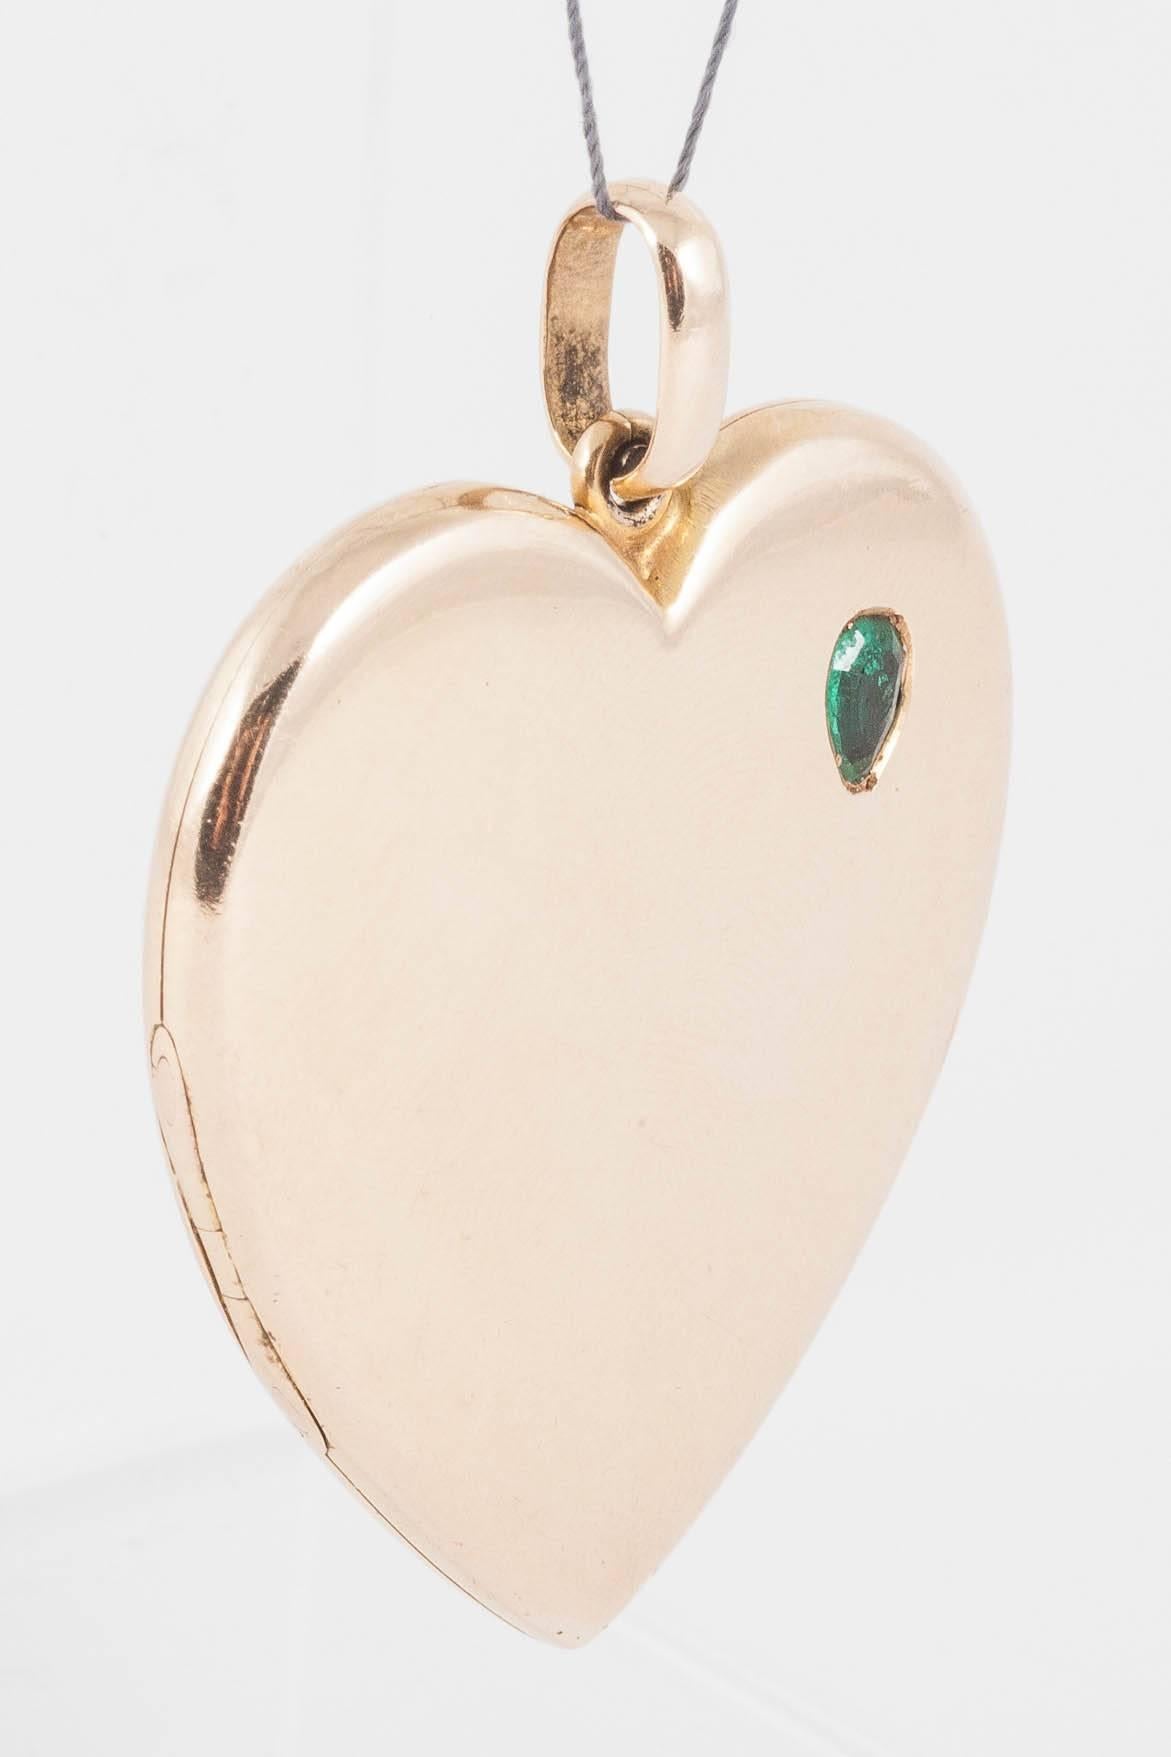 Late Victorian double locket in 15ct Gold inset with Emerald. 15ct stamped on top of loop